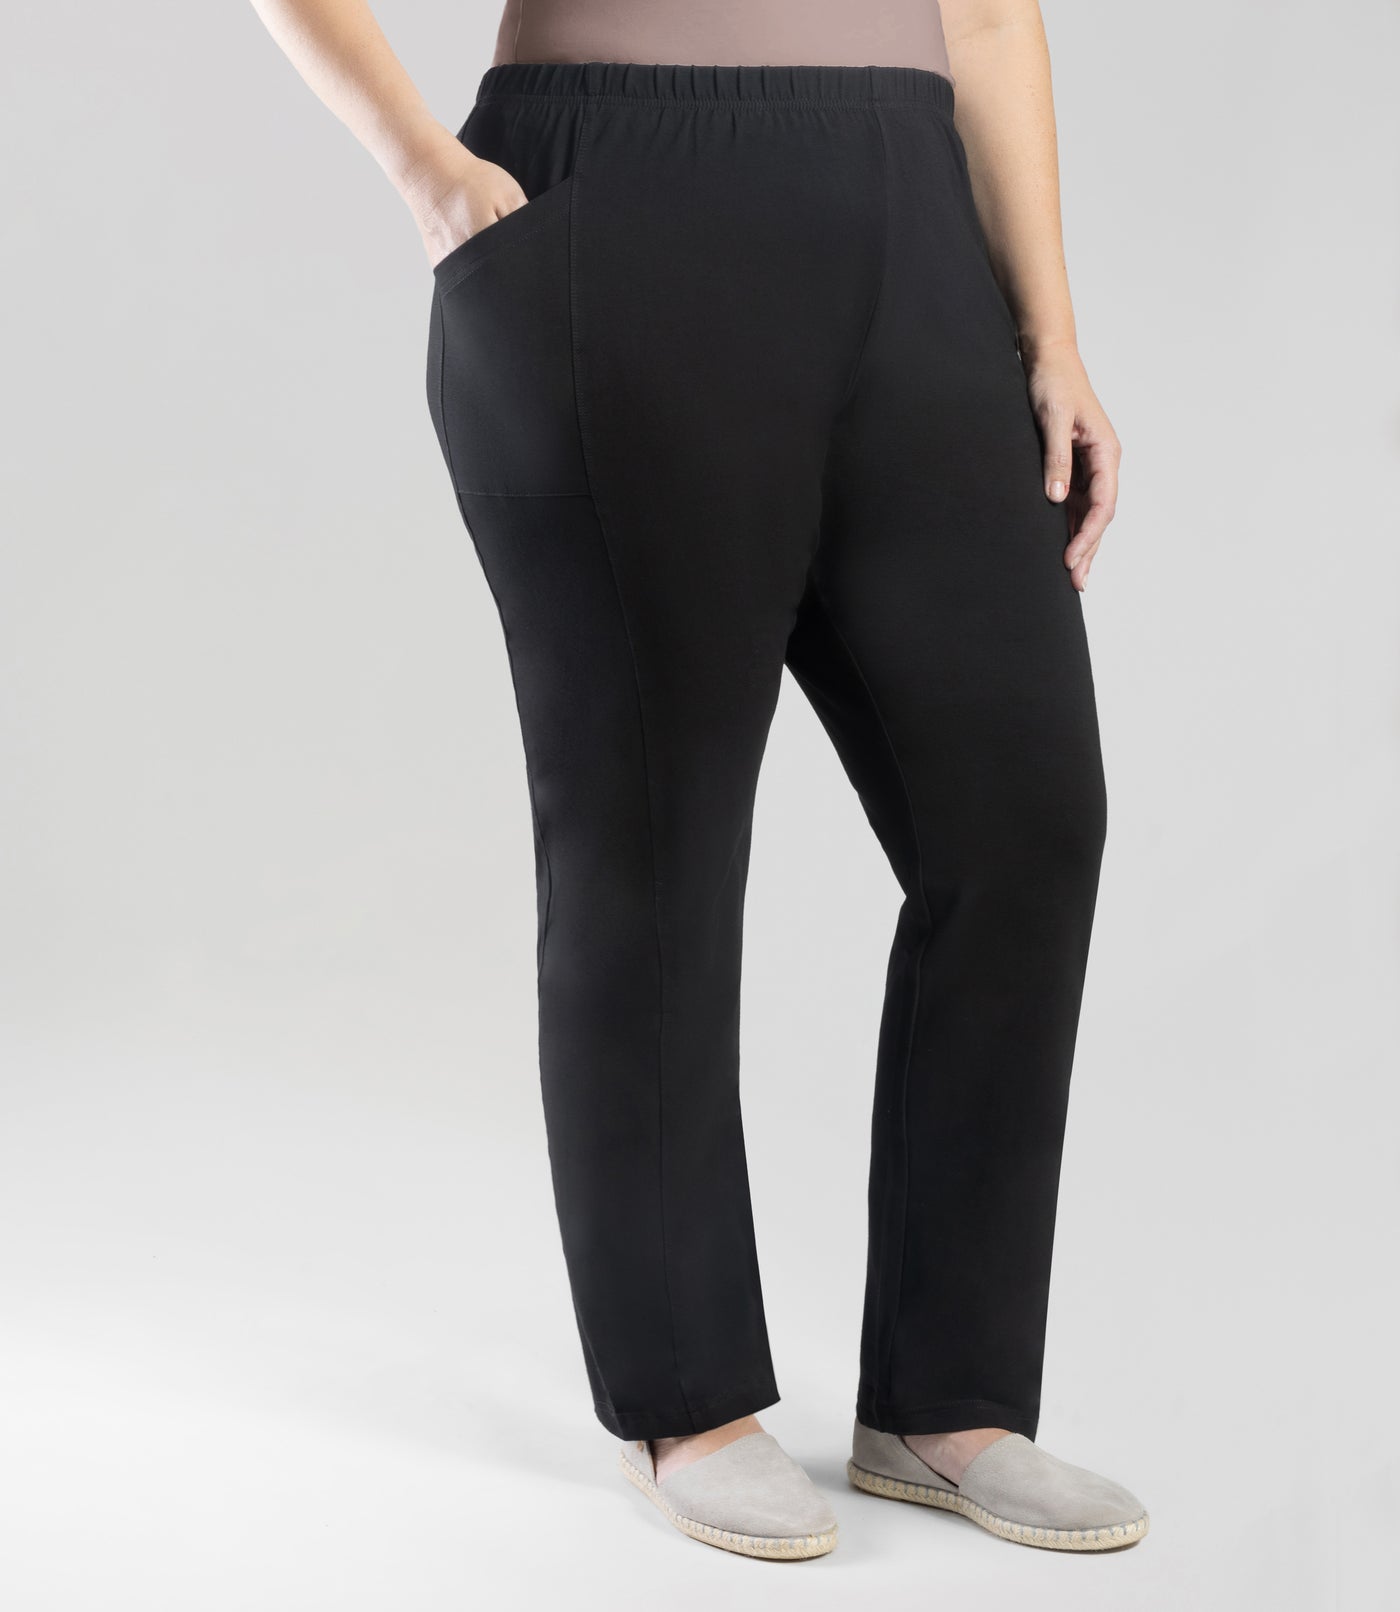 Bottom half of plus sized woman, front view, wearing JunoActive Tall Stretch Naturals Side Pocket Loose Fit Leggings in color black. Bottom hem is at the ankle. Woman is wearing black sneakers.